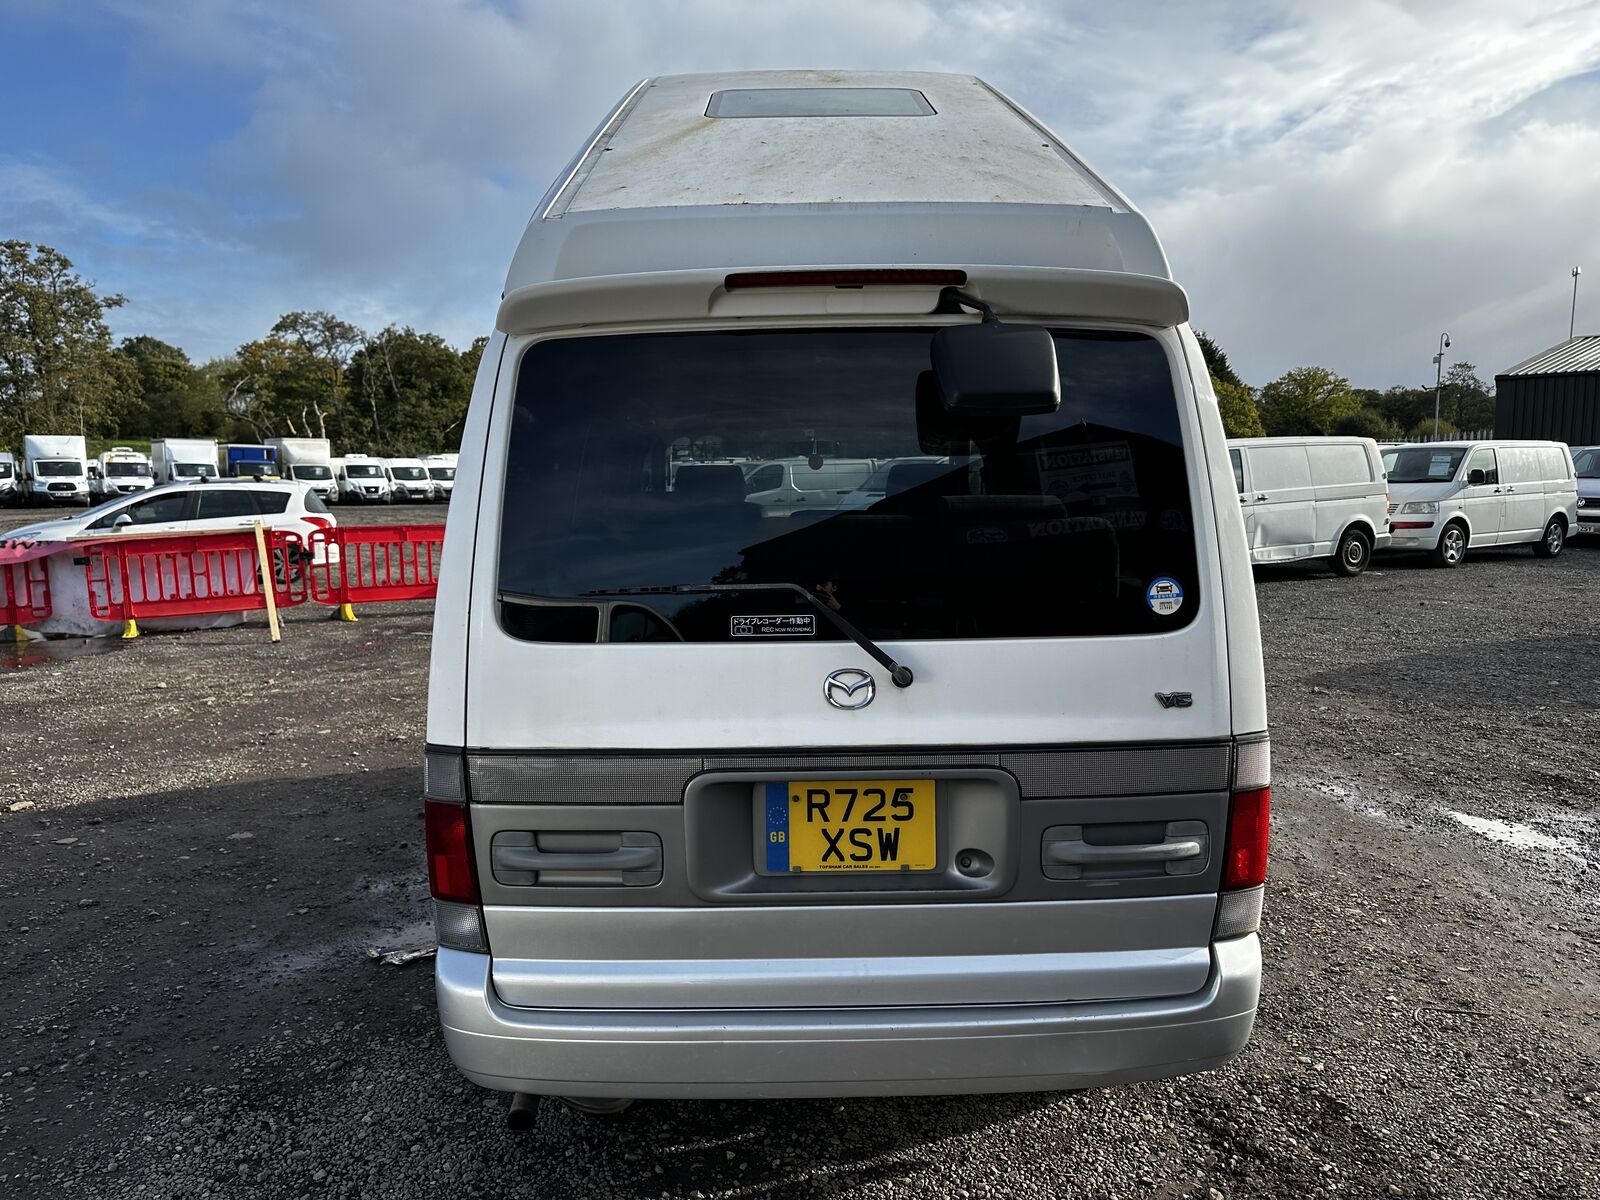 Bid on 94K MILES - CLASSIC 1998 MAZDA BONGO FRIENDEE POP TOP CAMPER MINI BUS DAY VAN - NO VAT ON HAMMER- Buy &amp; Sell on Auction with EAMA Group